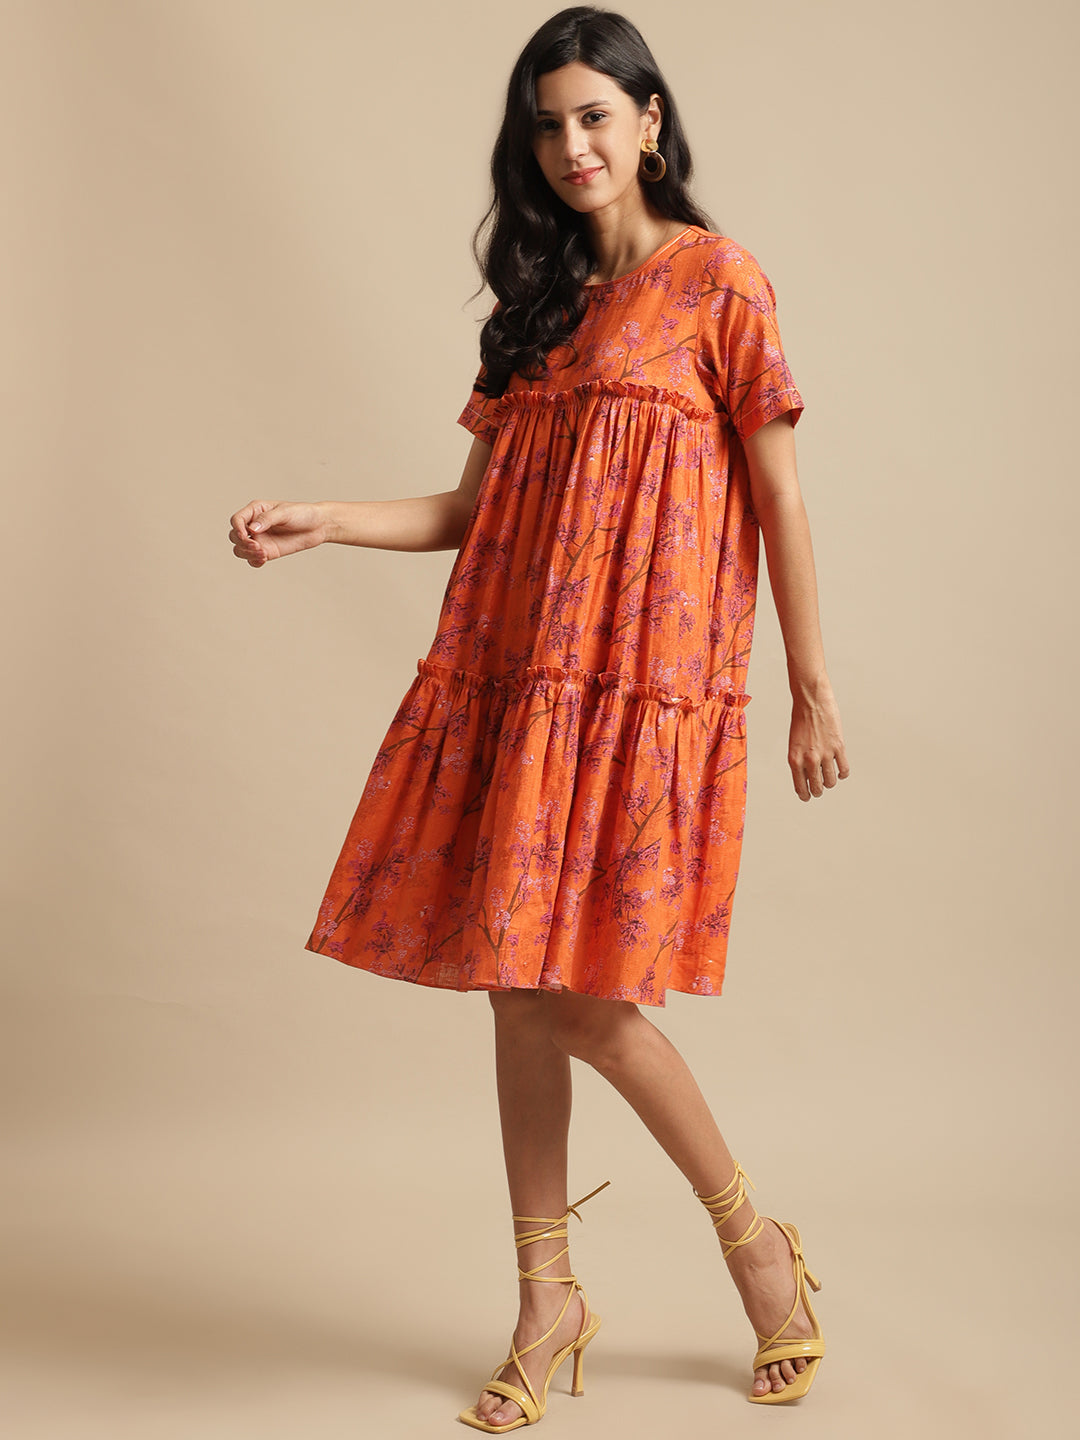 Certified Hemp Orange A Line Dress at Kamakhyaa by Ewoke. This item is Casual Wear, Festive 23, For Her, Hemp, Mini Dresses, Natural with azo free dyes, Orange, Prints, Relaxed Fit, Tiered Dresses, Womenswear